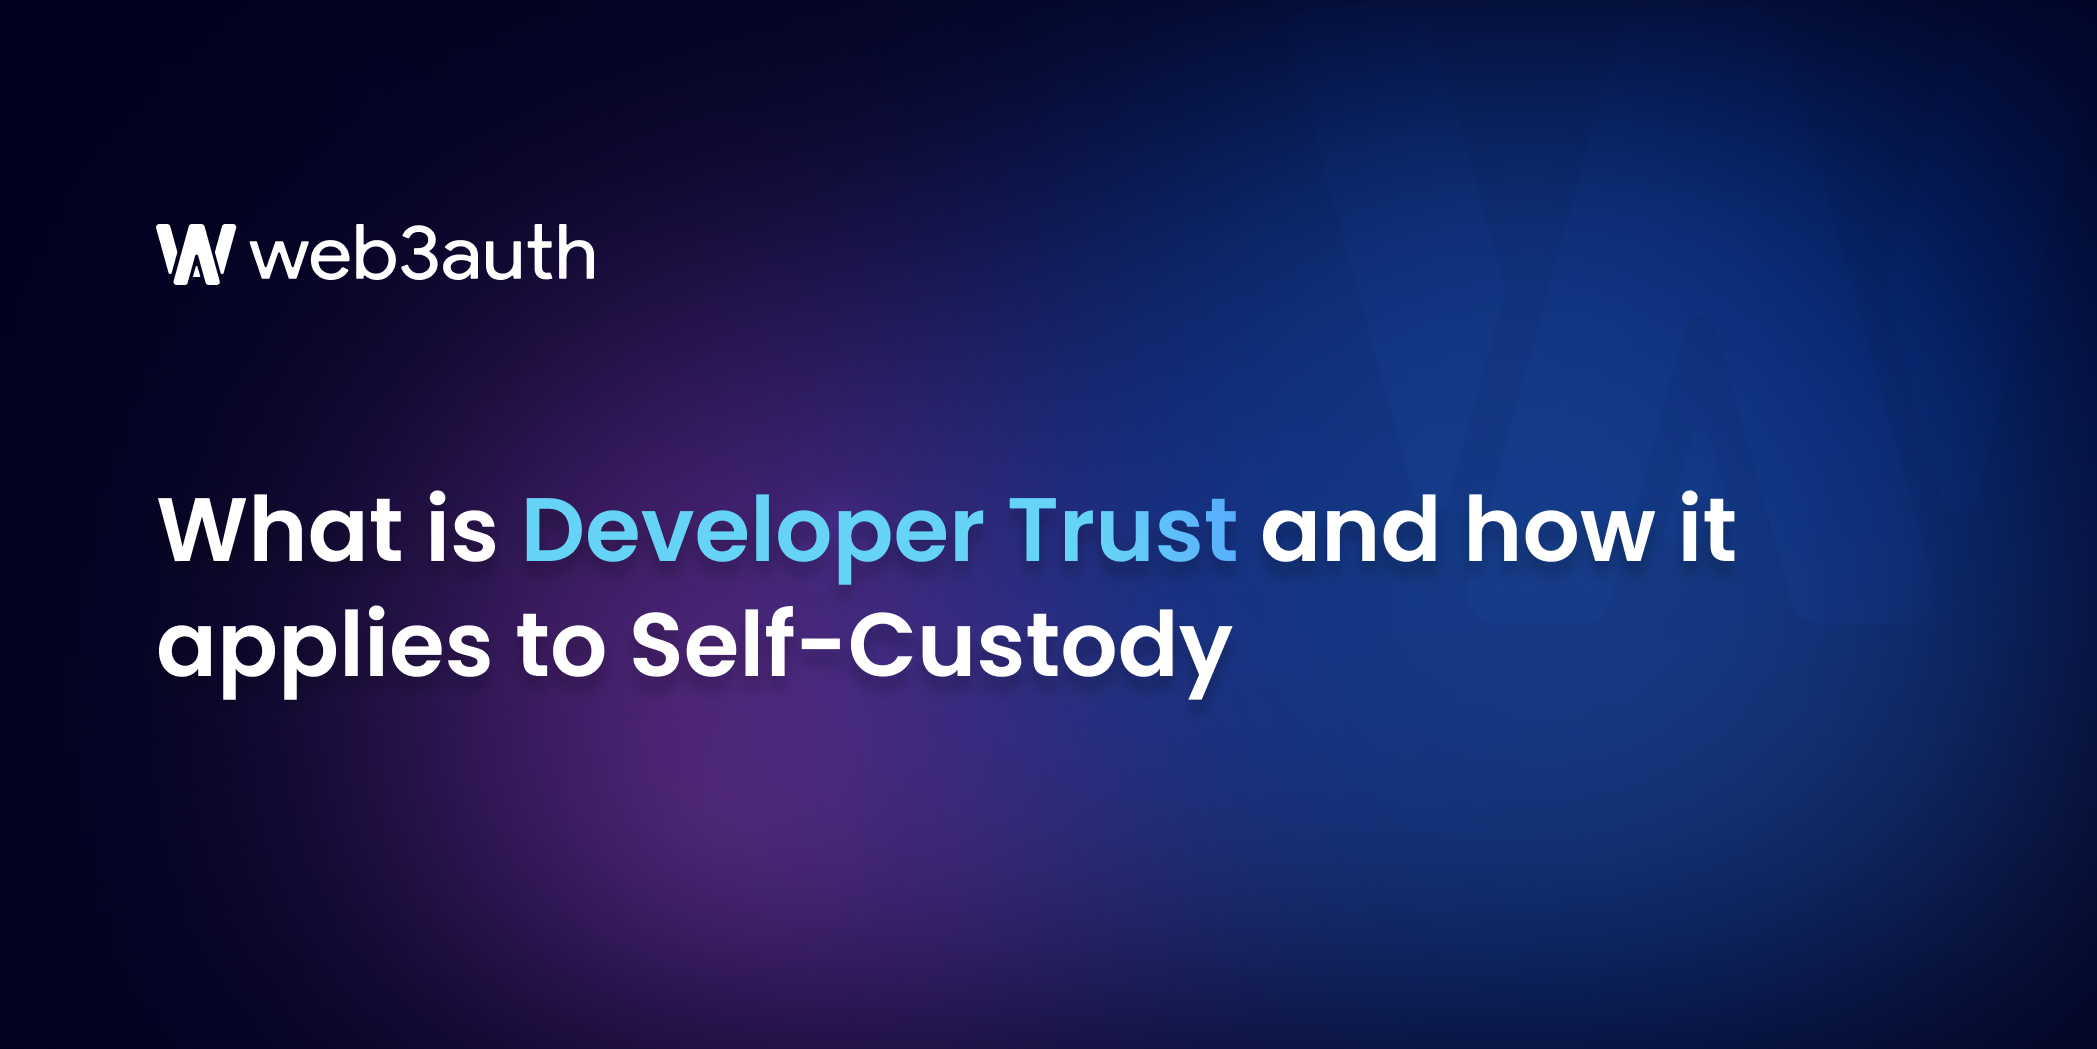 What is Developer Trust and how it applies to Self-Custody